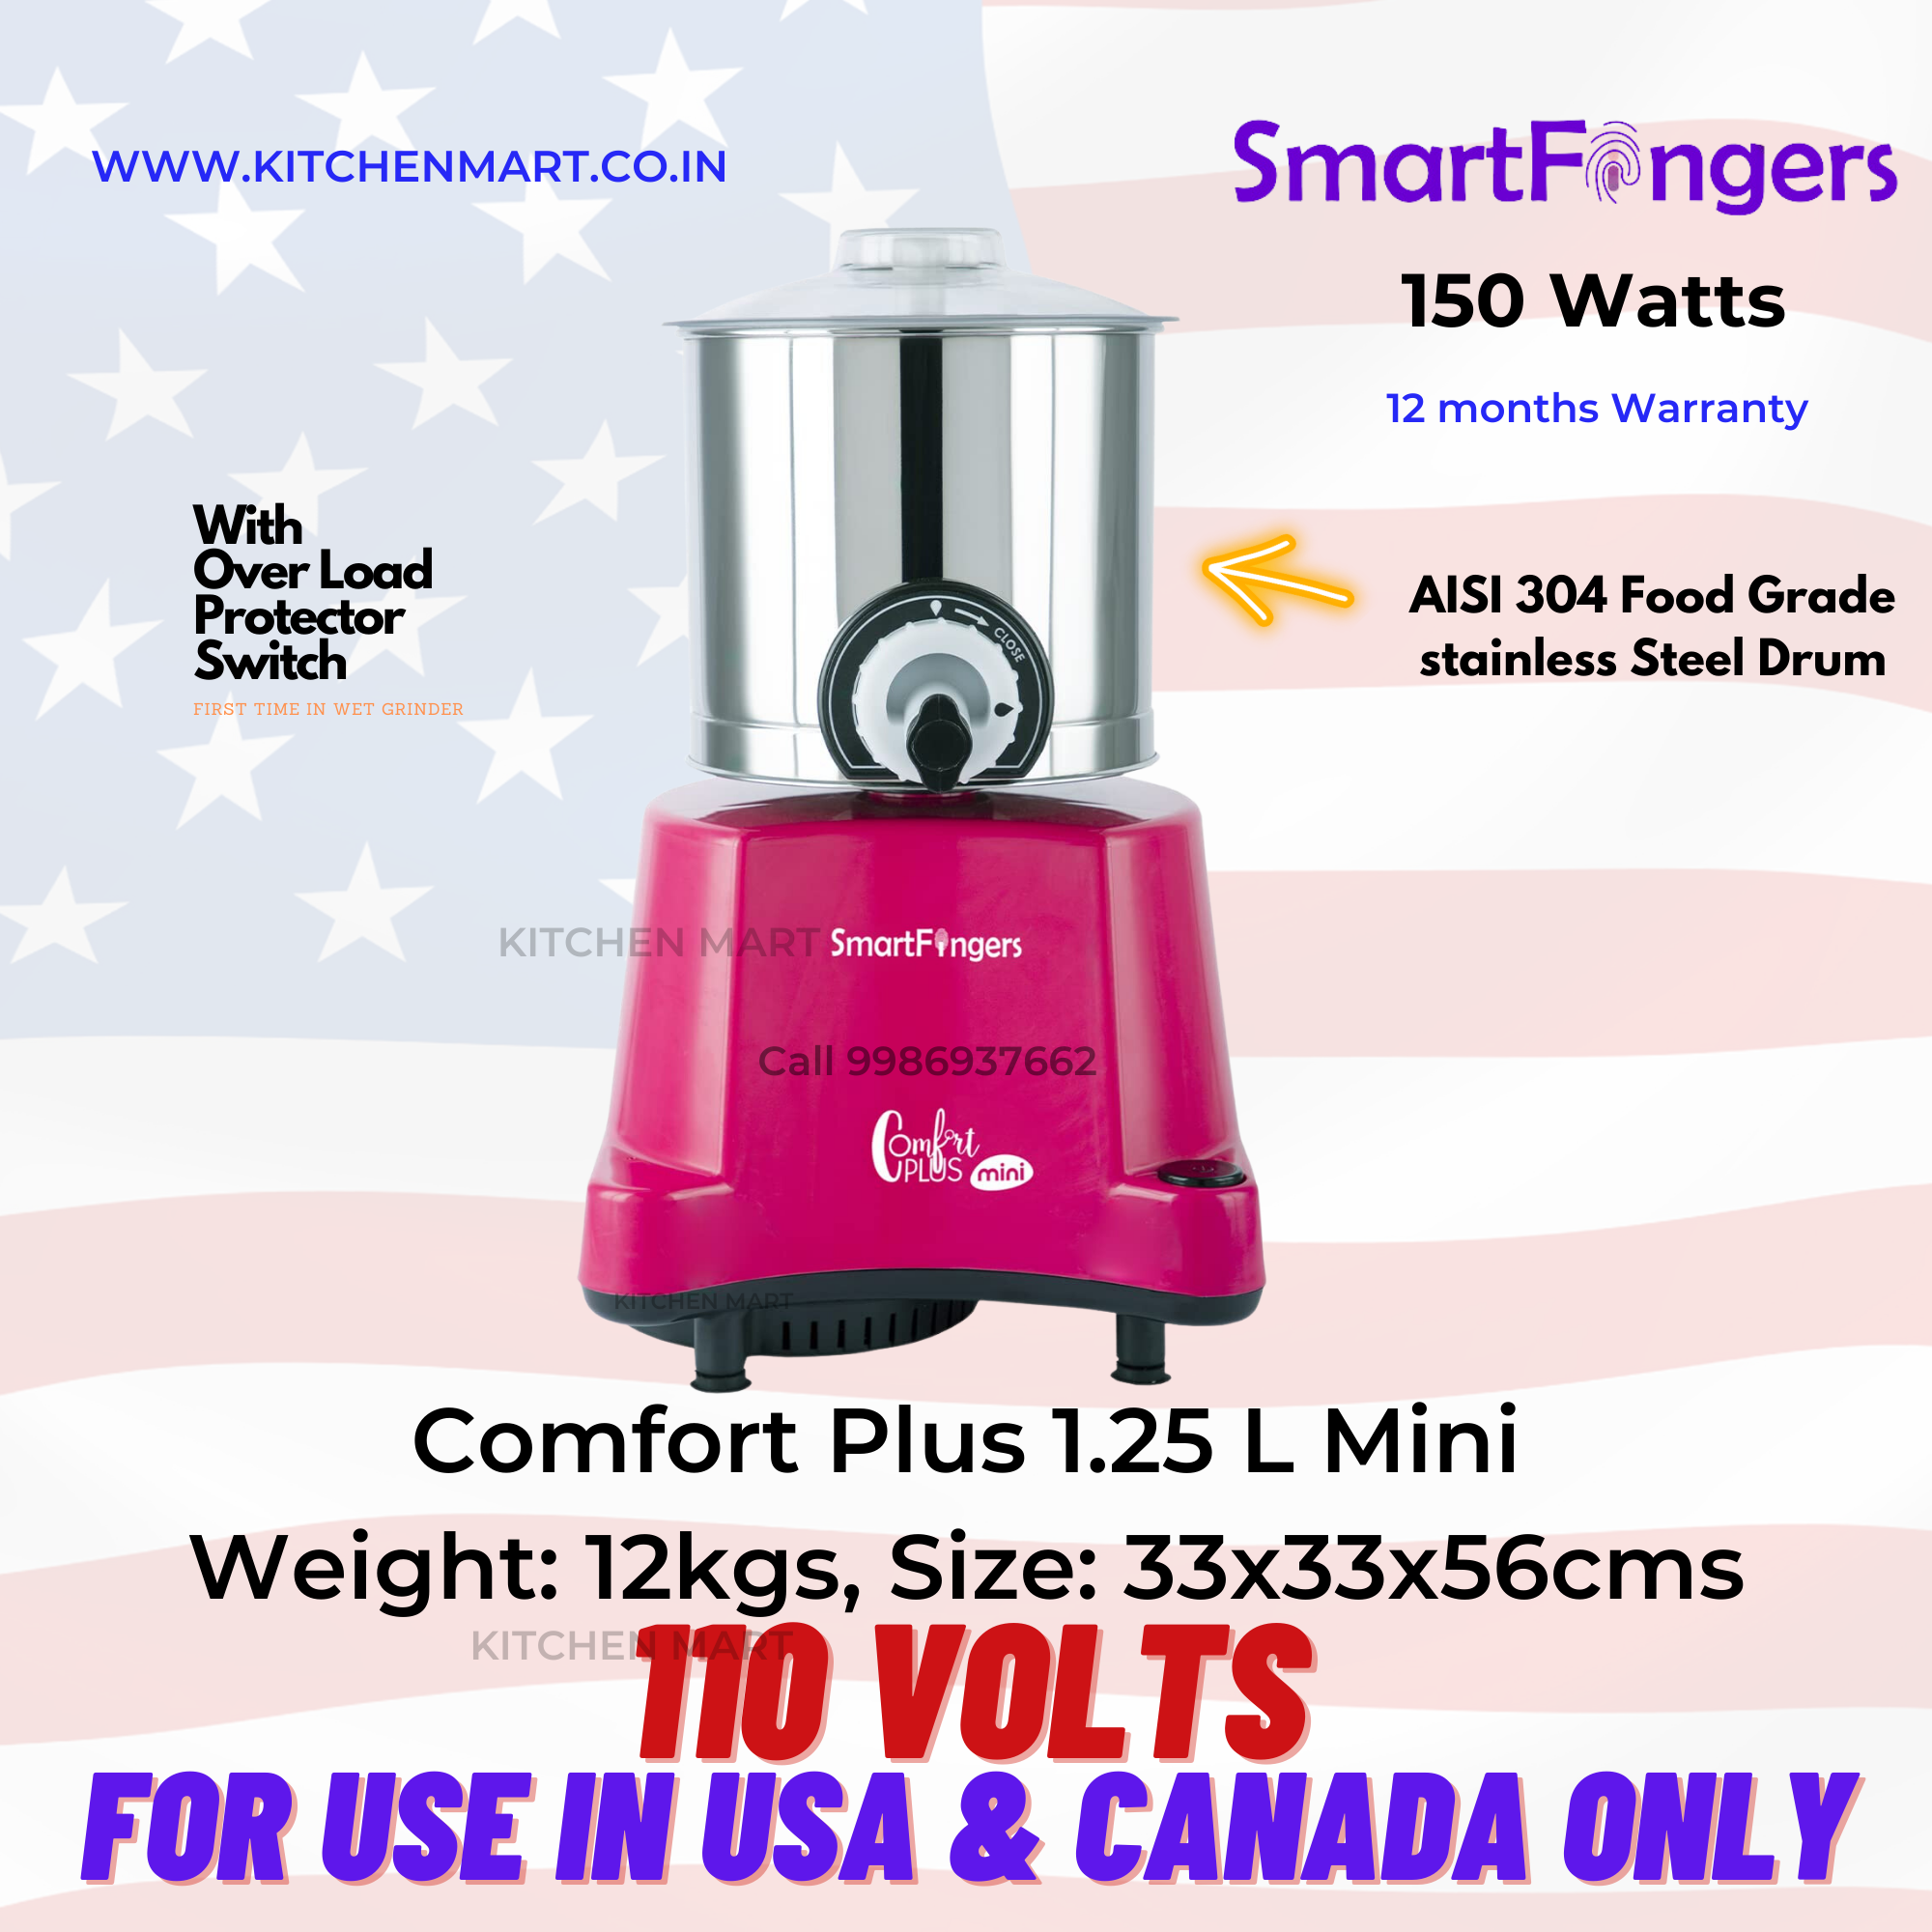 Buy SmartFingers Comfort Plus Table Top Magic Wet Grinder 230V 50hz, 2  Liter, White, 2 Stone Online at Low Prices in India 